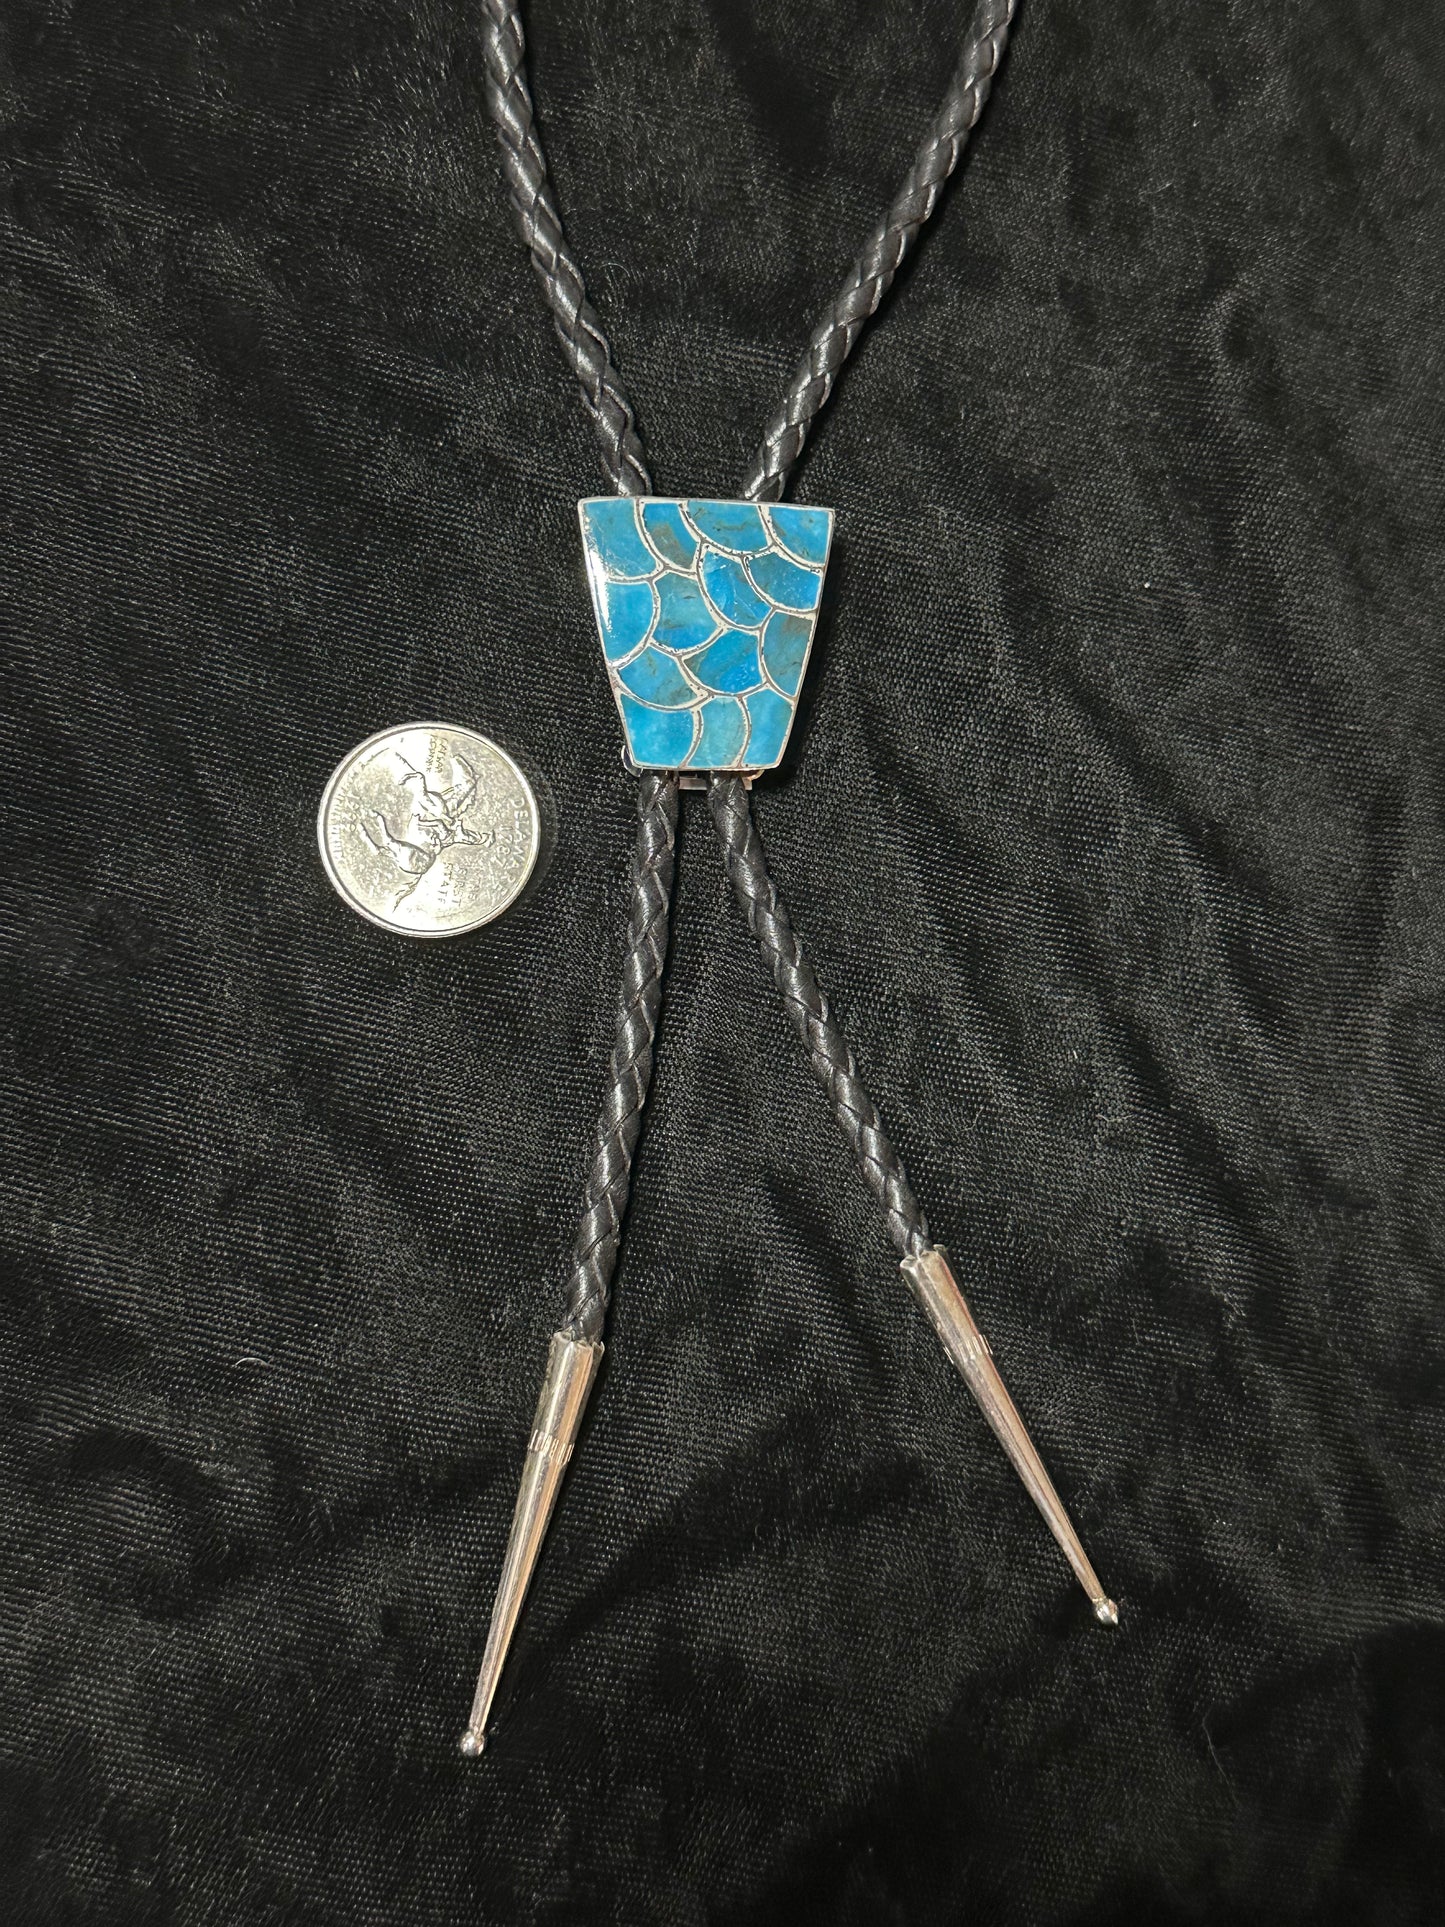 Turquoise Fish Scale Inlay Bolo Tie by Lynelle Johnson, Navajo